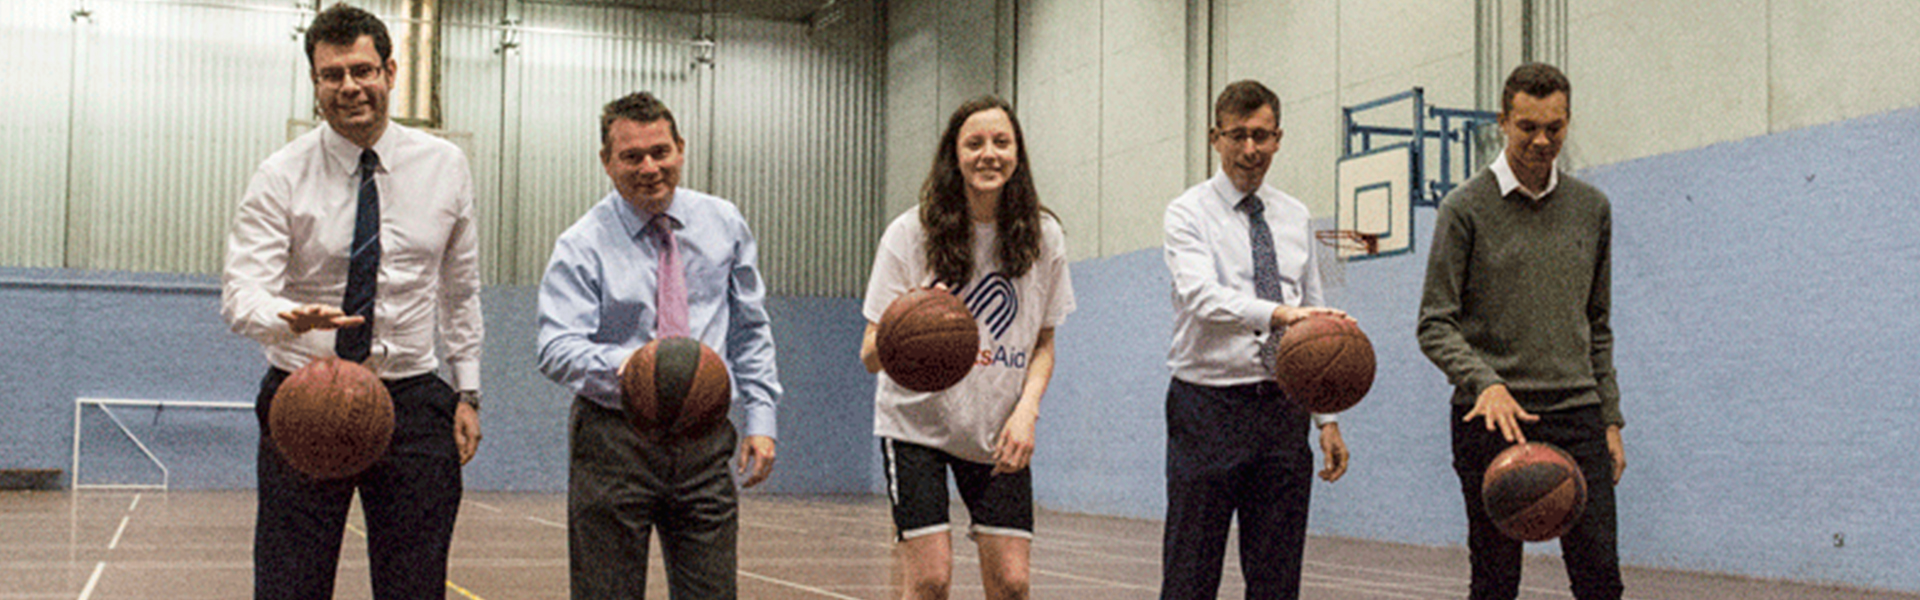 Suffolk SportsAid has marked the end of another successful year by awarding a grant to England basketball star Maya Price